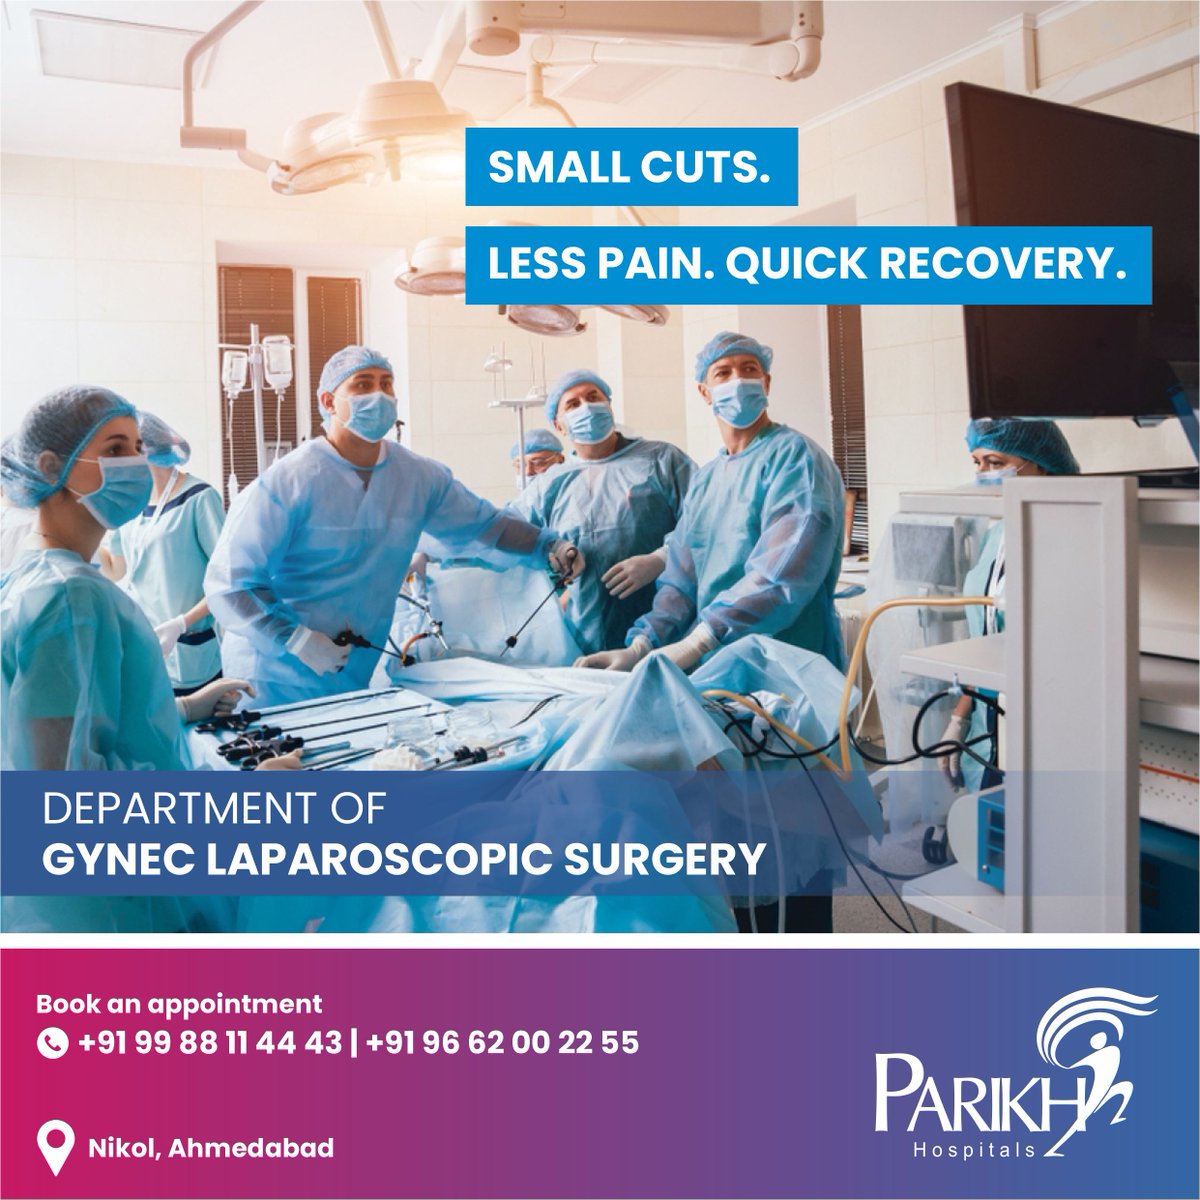 Visit Parikh Hospitals, Nikol and consult with our skilled team of Obstetrics and Gynecologists for all your surgical needs. To book an appointment, call 99 88 11 44 43 | 99 88 11 44 45 #ParikhHospitals #nikol #SurgeryRecovery #womenshealth #pregnancy #gynecology #gynecologist